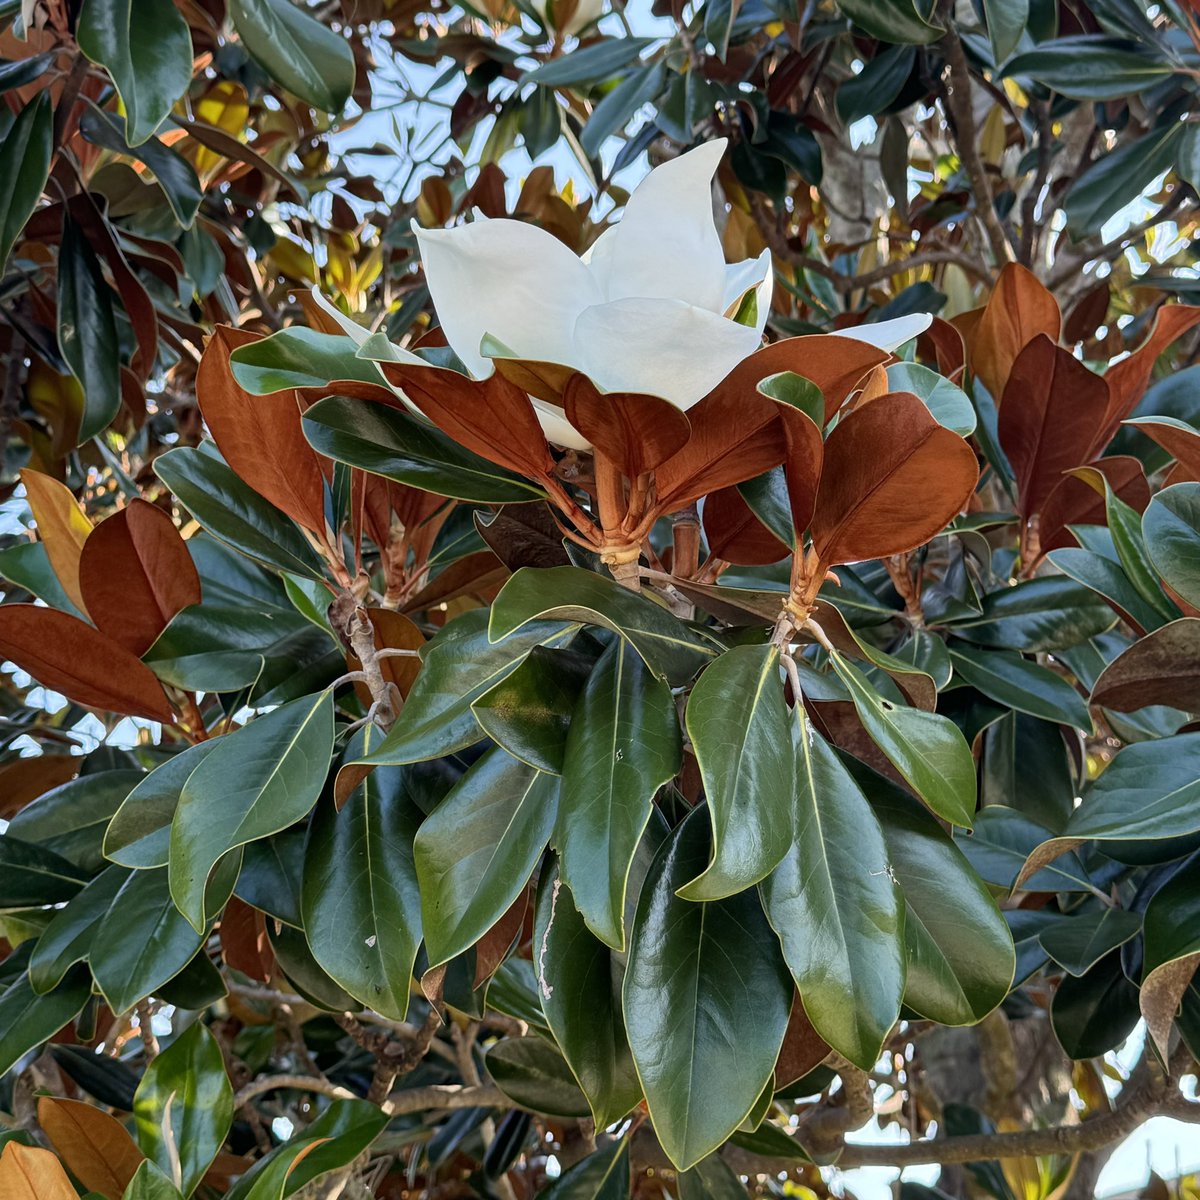 Gotta love the contrast between a southern #magnolia #blossom & its leaves. #Florida #nativeplant #Fridayflowers #flowersonFriday